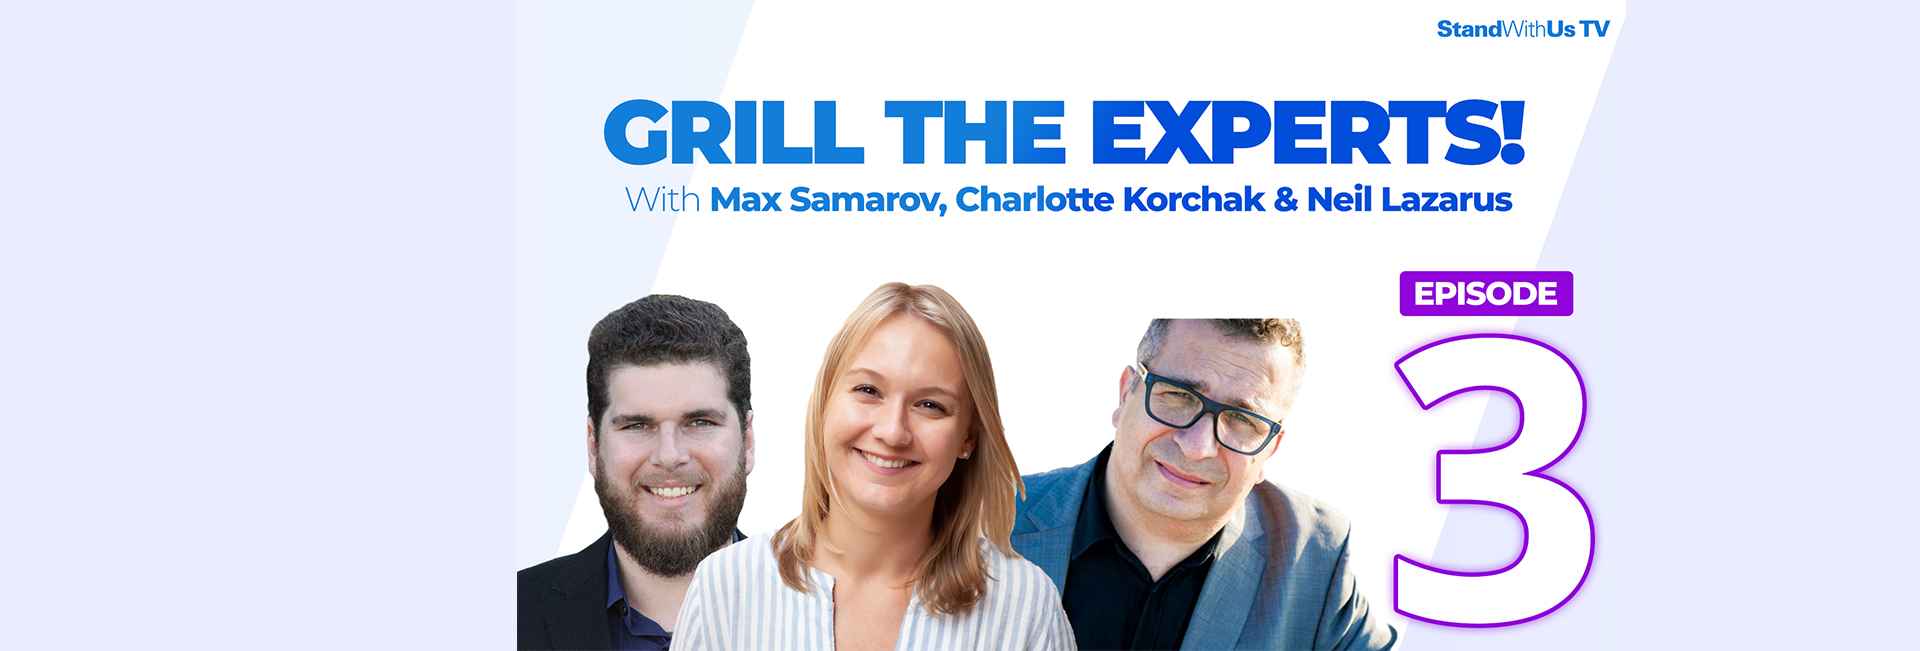 Grill The Experts | Episode 3